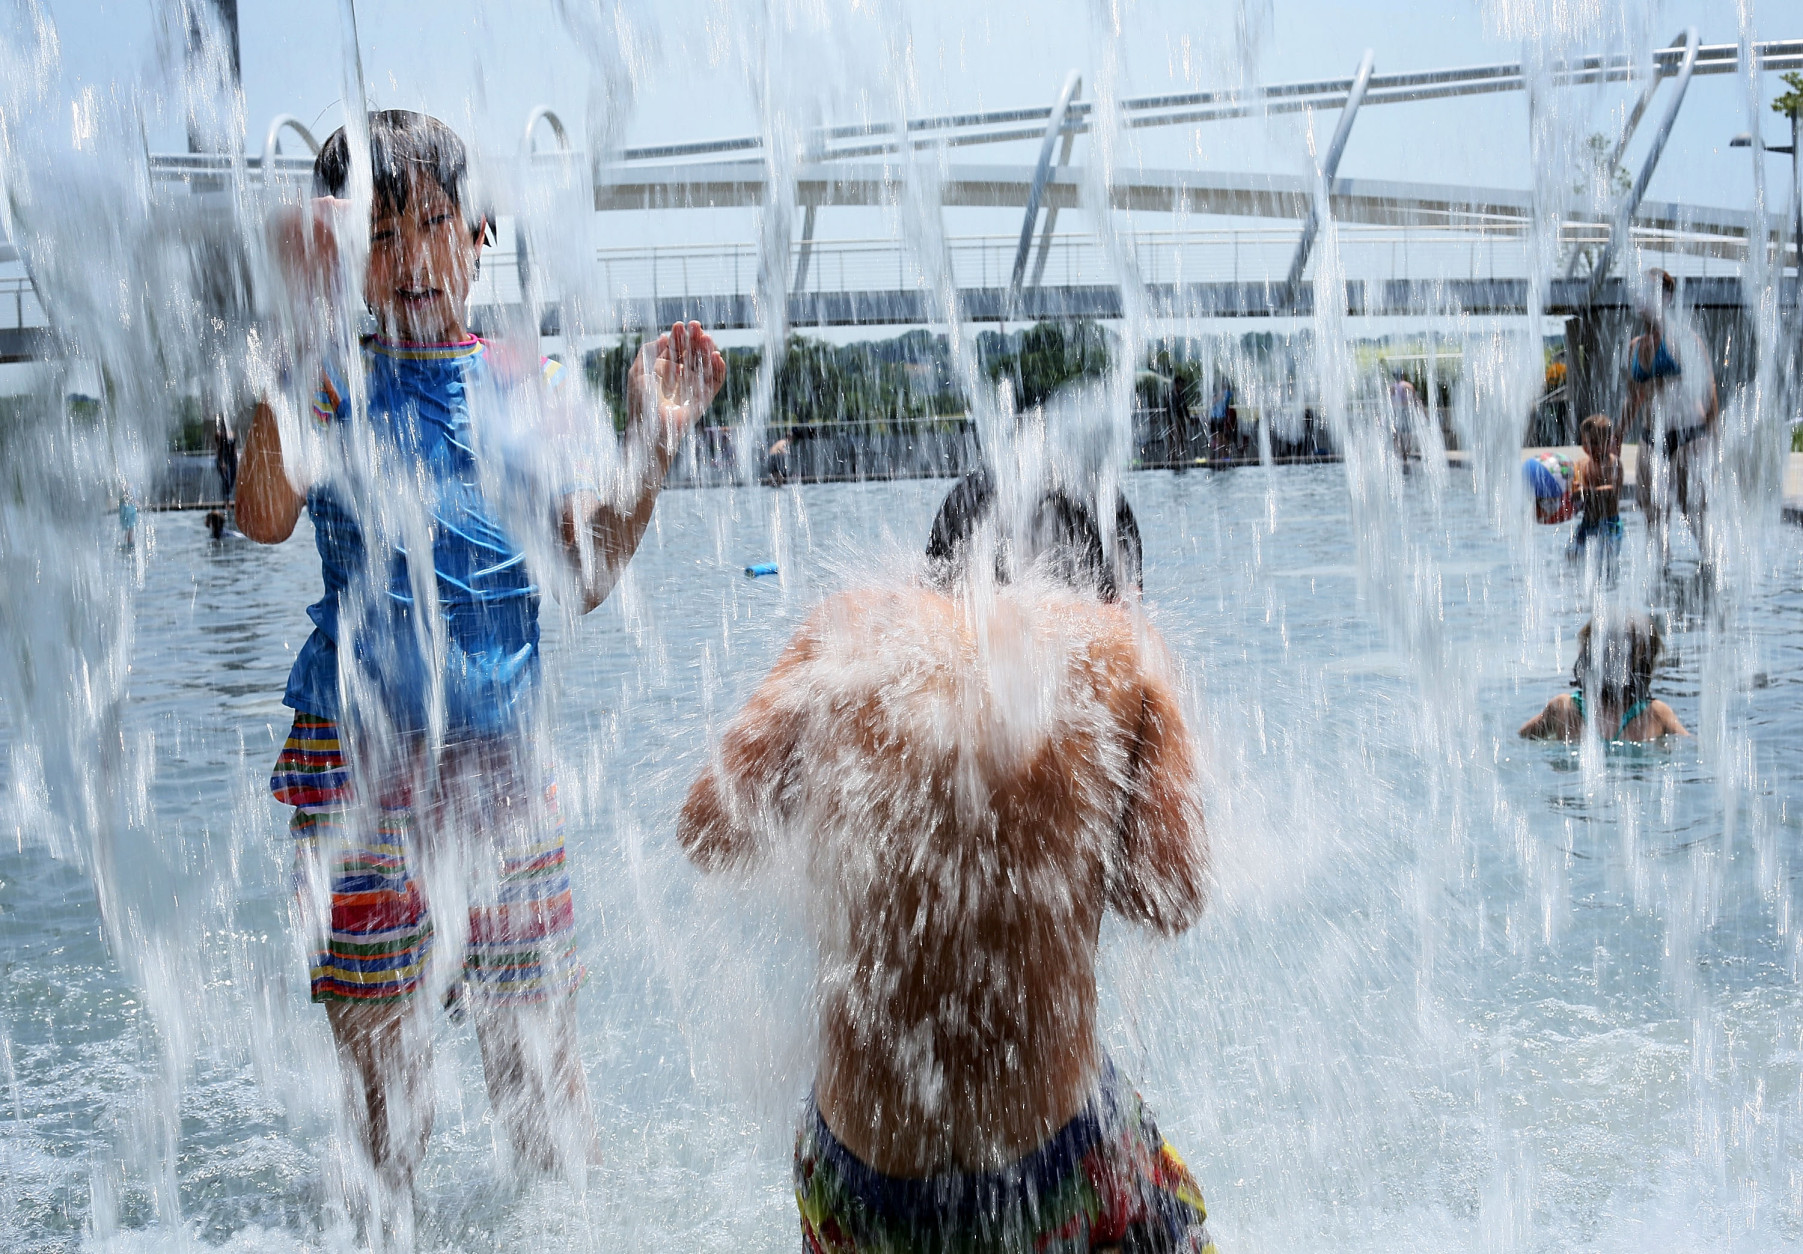 WASHINGTON, DC - JULY 05:  Ten-year-old Lilly Hwang-Geddes (L) of Ithaca, New York, plays in a fountain at the Yards Park July 5, 2012 in Washington, DC. A record heat wave has been in the area for more than a week. Weather forecast predicted the hot weather will last through Sunday with possible daily triple-digit temperature.  (Photo by Alex Wong/Getty Images)